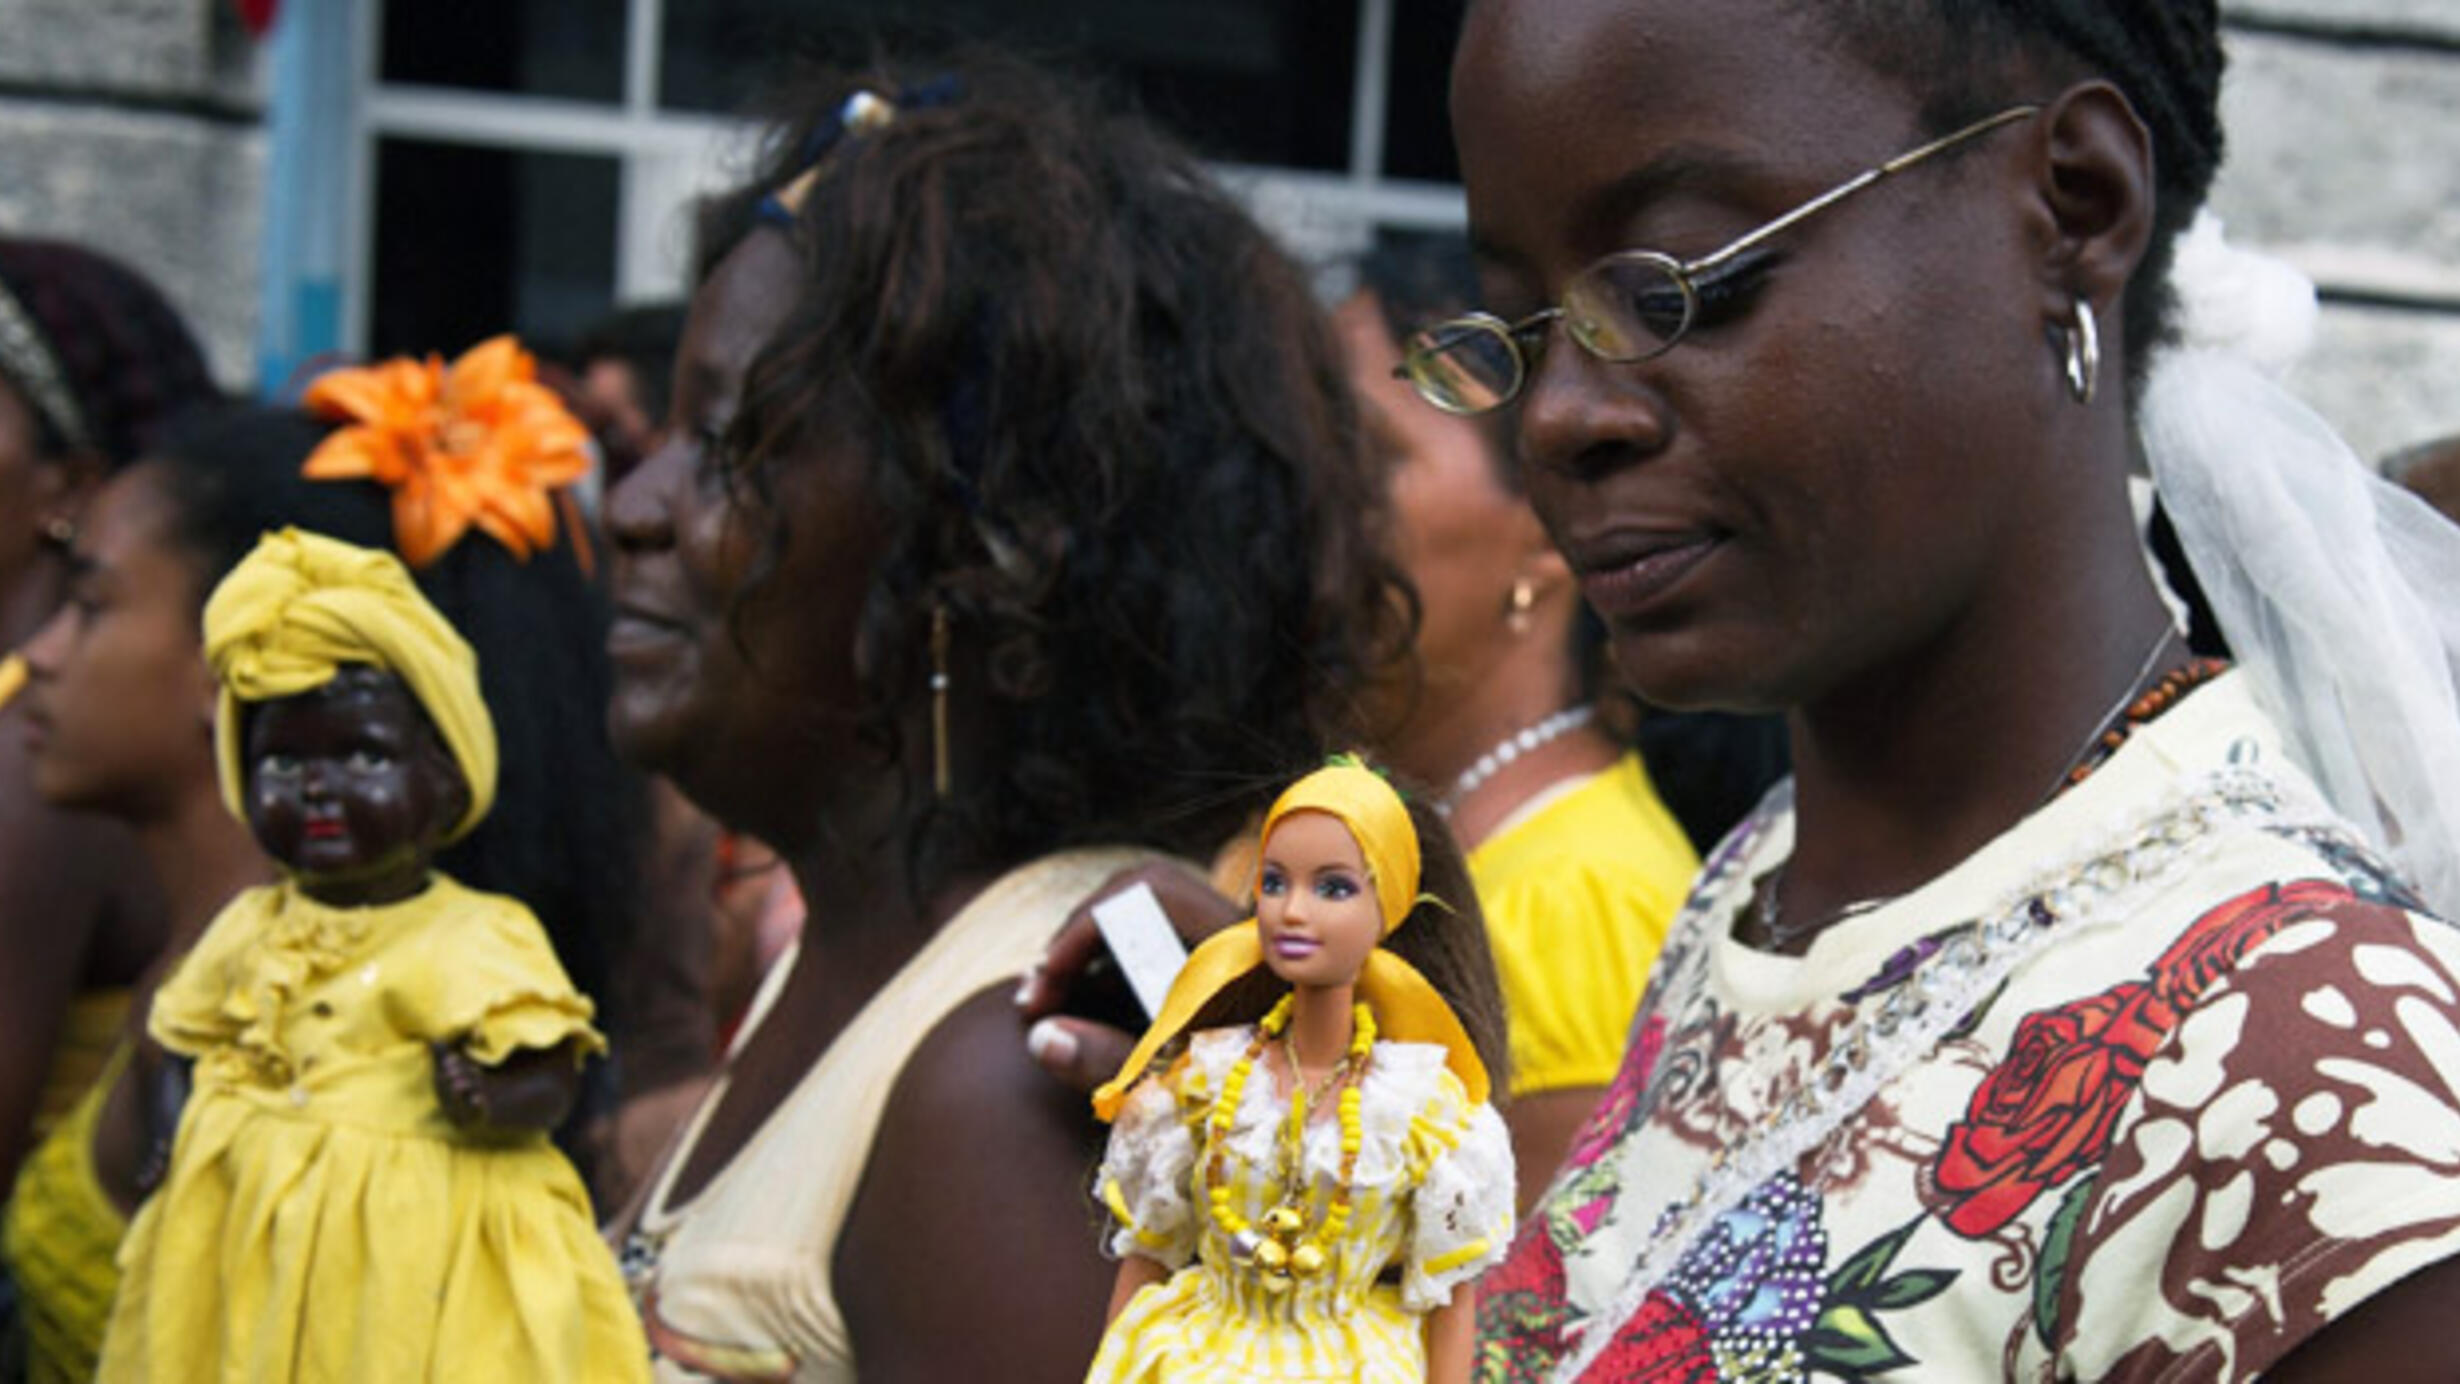 A group of women carry dolls dressed to represent Oshun.